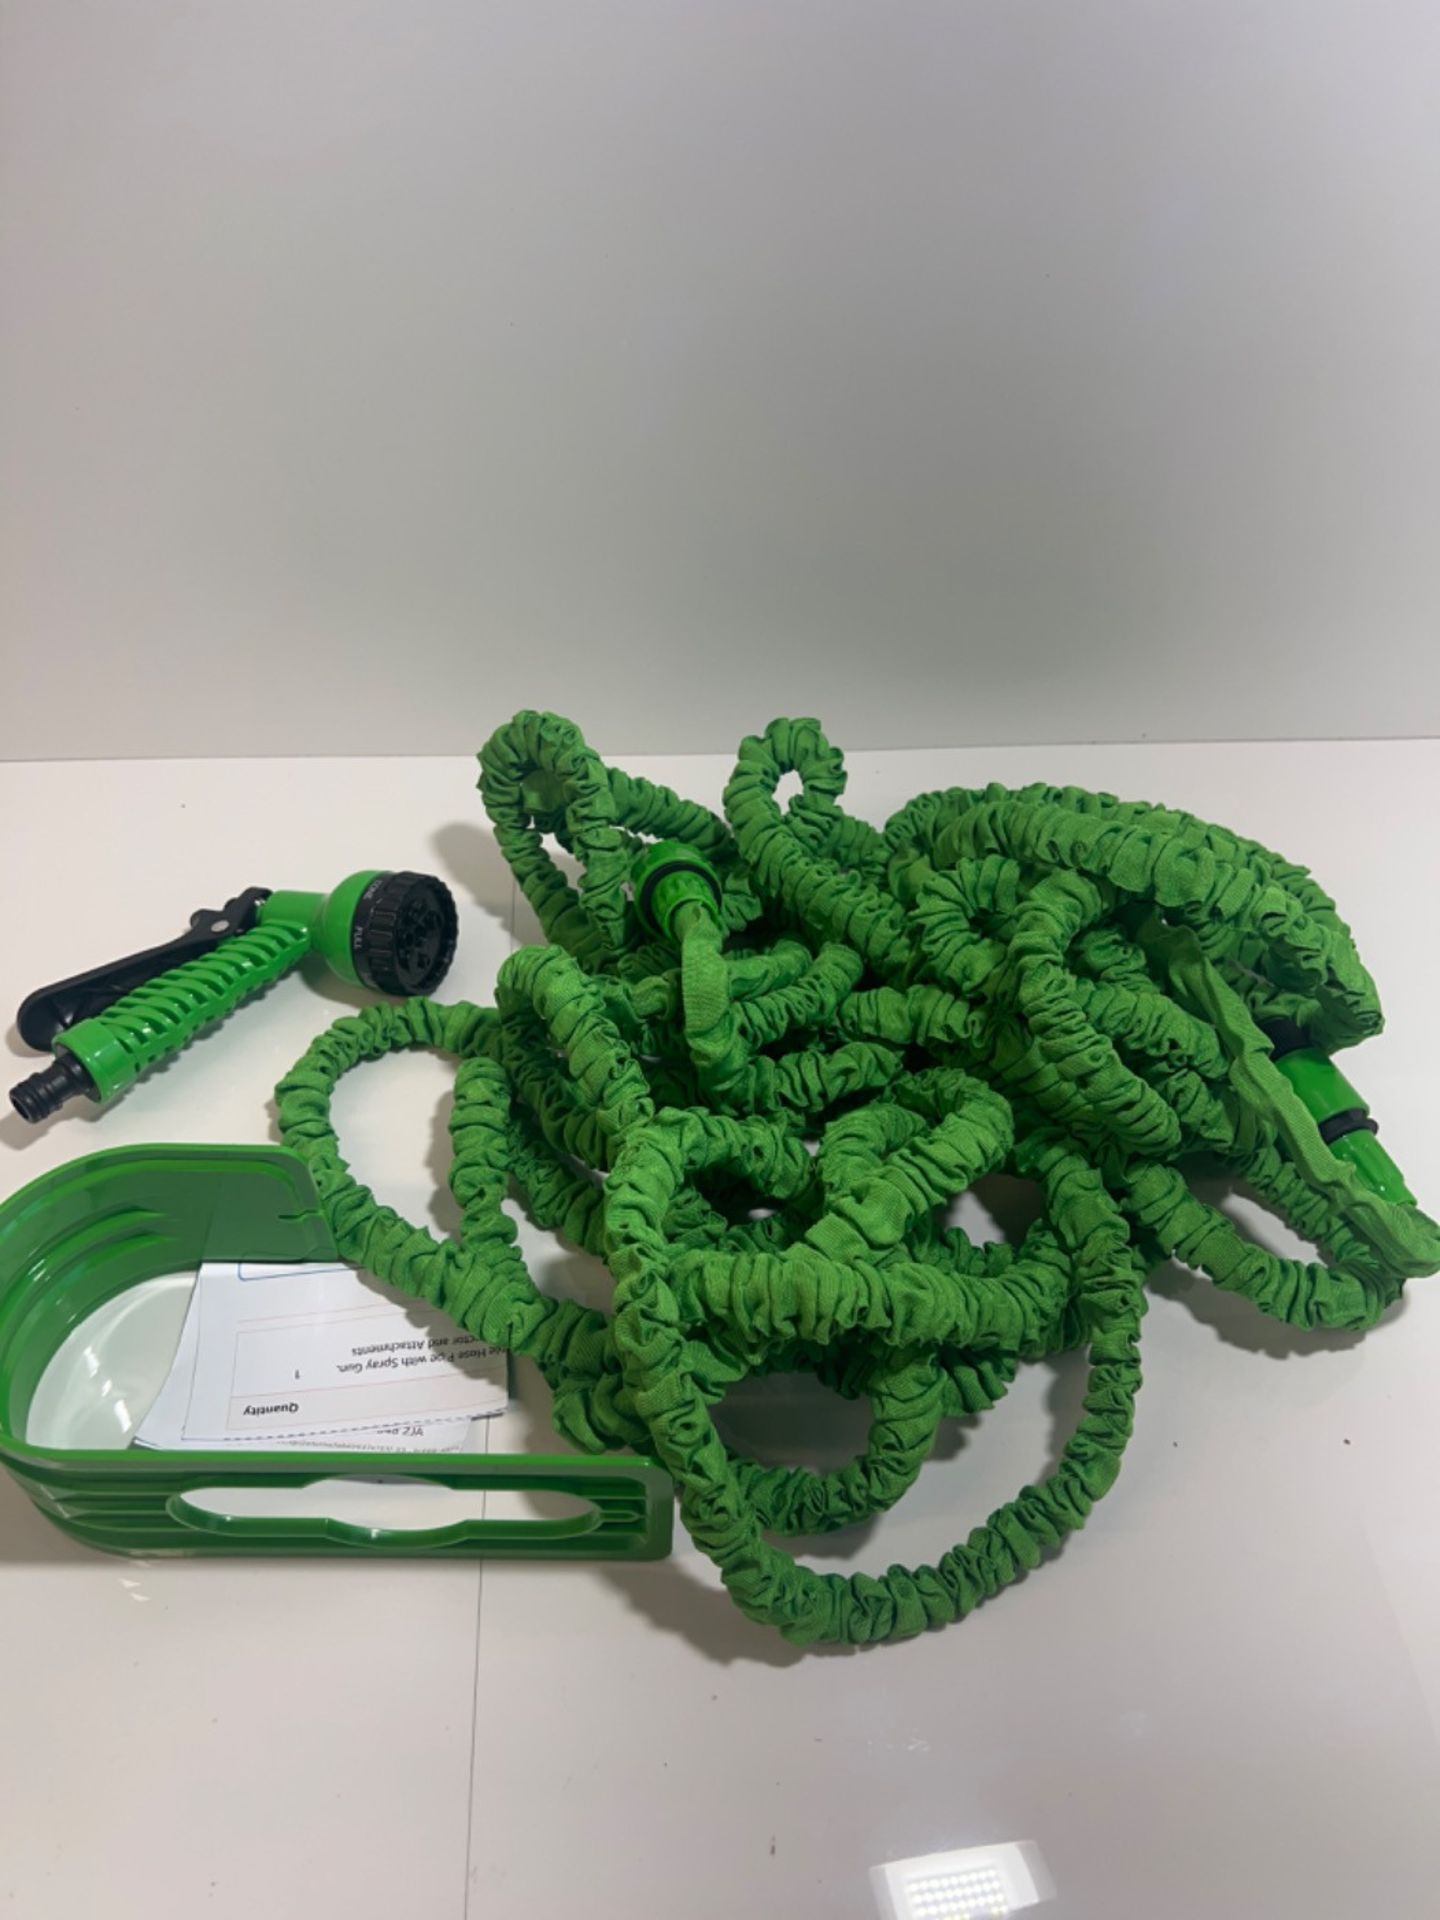 kitnice Expandable Garden Hose 100FT - Flexible Hose Pipe with Spray Gun. Ideal for Gardening, Wate - Image 2 of 3